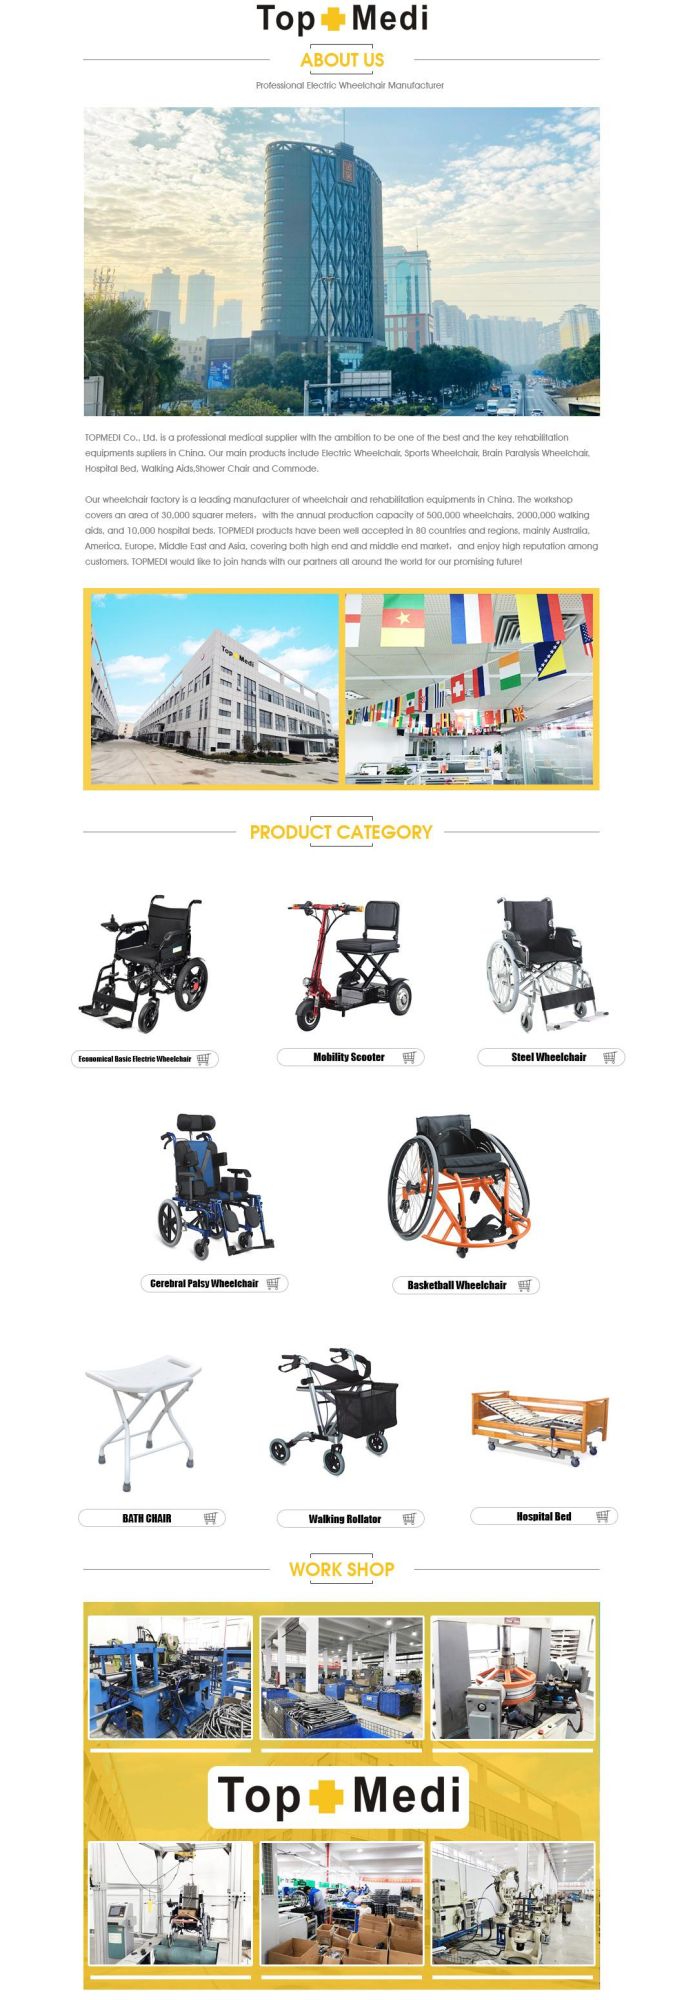 Topmedi Lightweight Foldable Electric Wheelchairs with Small Wheel Pg Controller